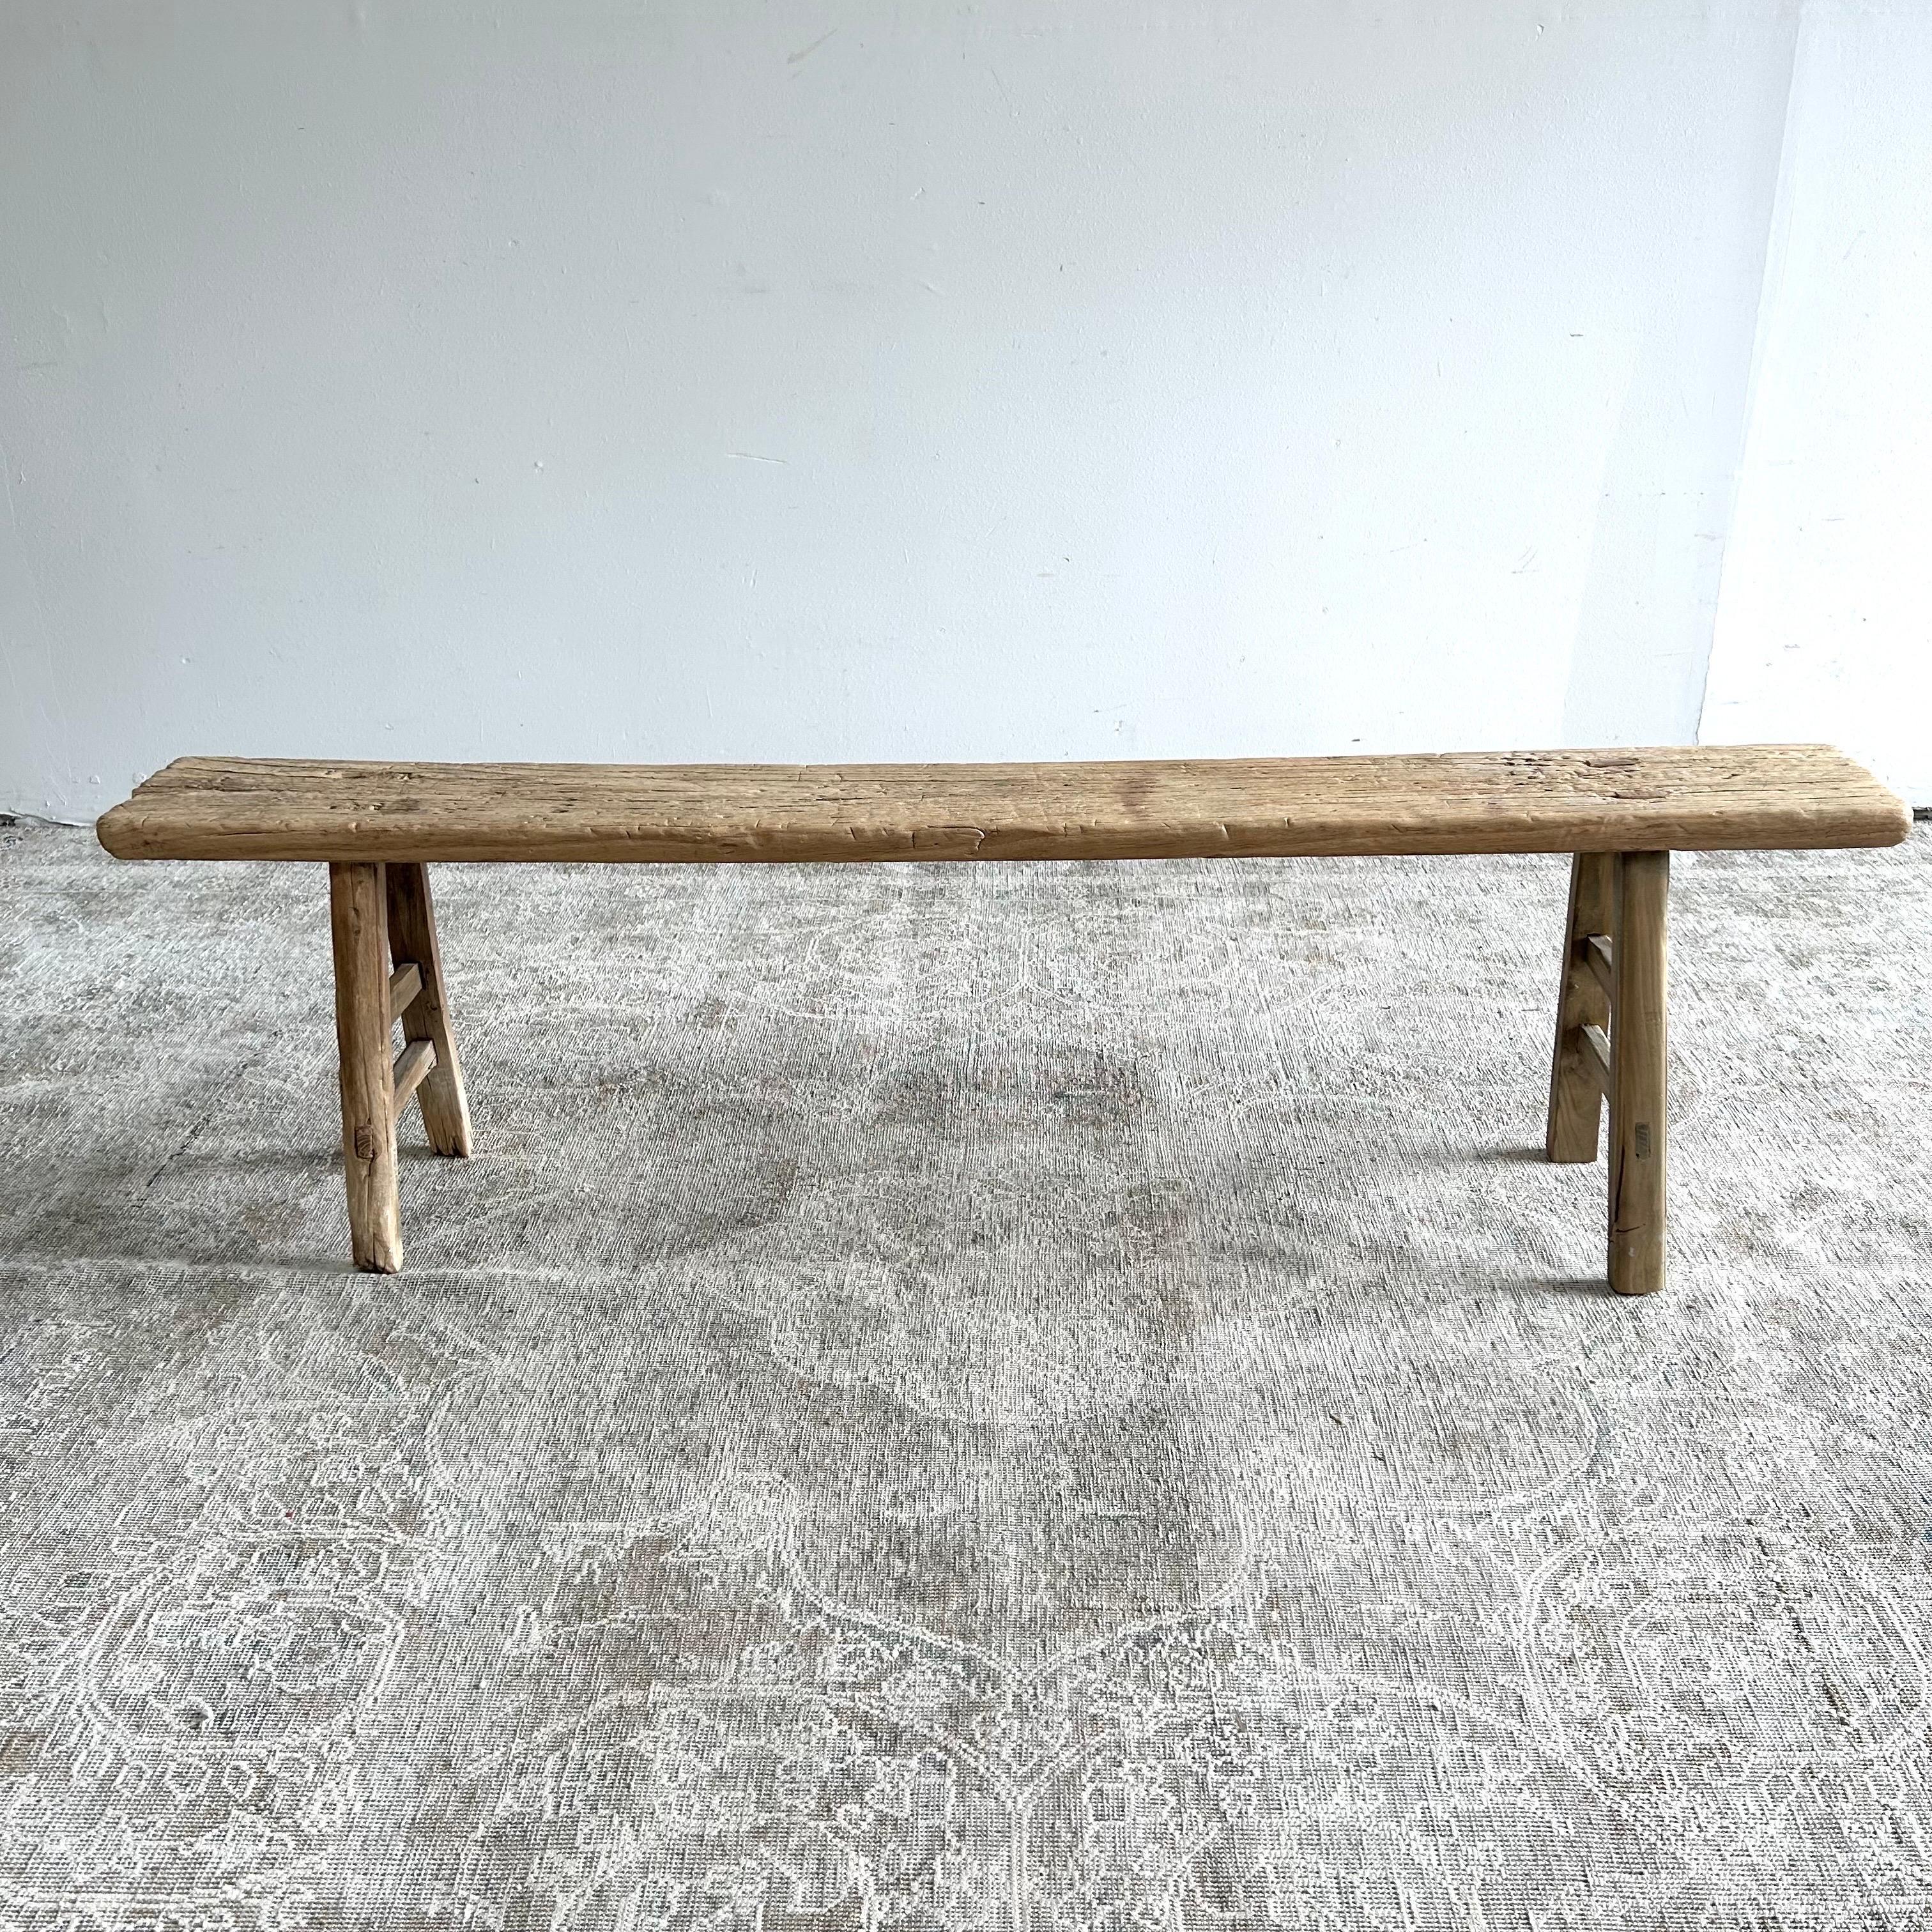 Vintage Elm Wood Skinny Bench with Aged Patina 1